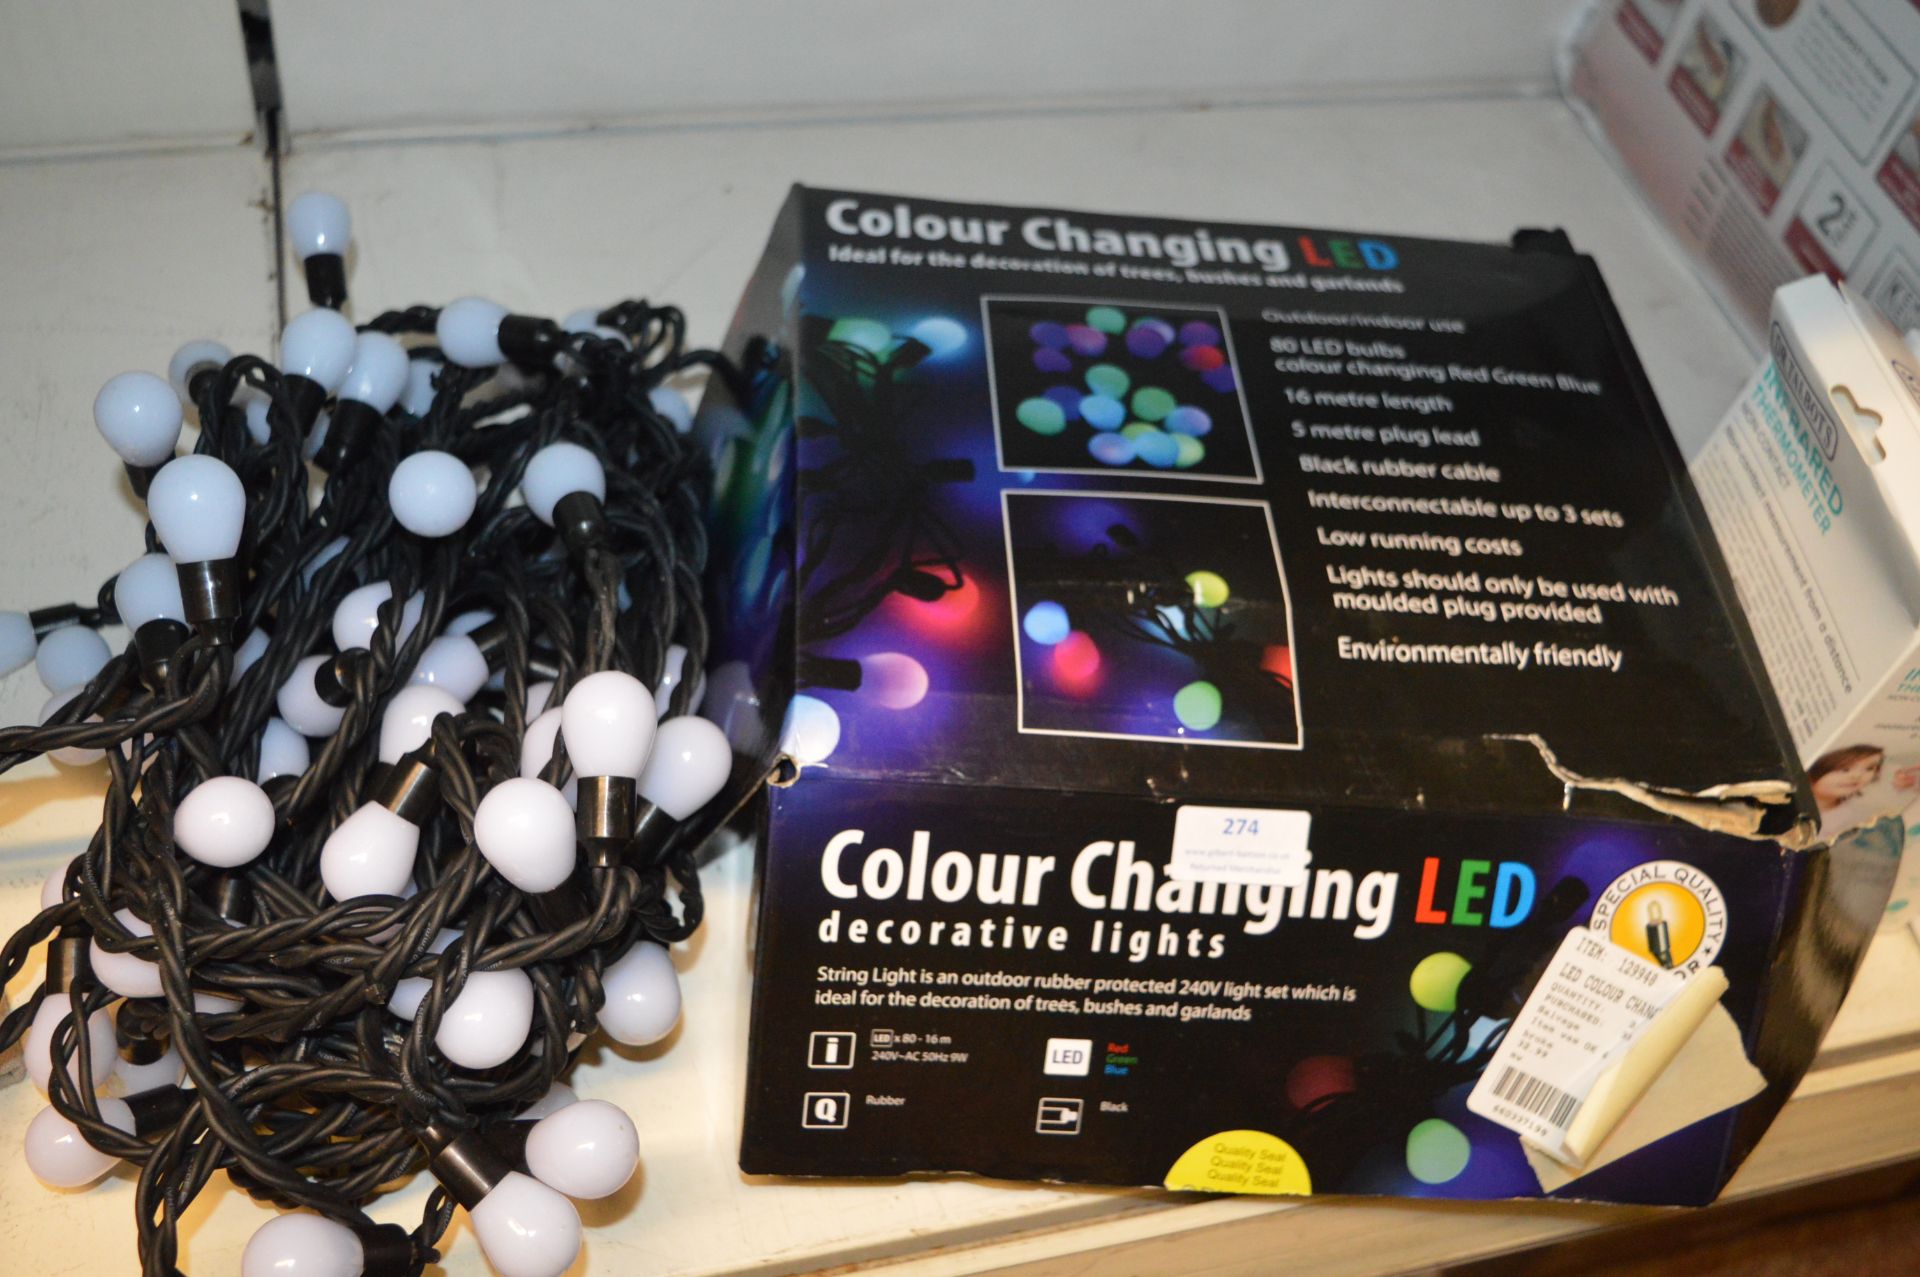 *Two LED Colour Changing Light Strings